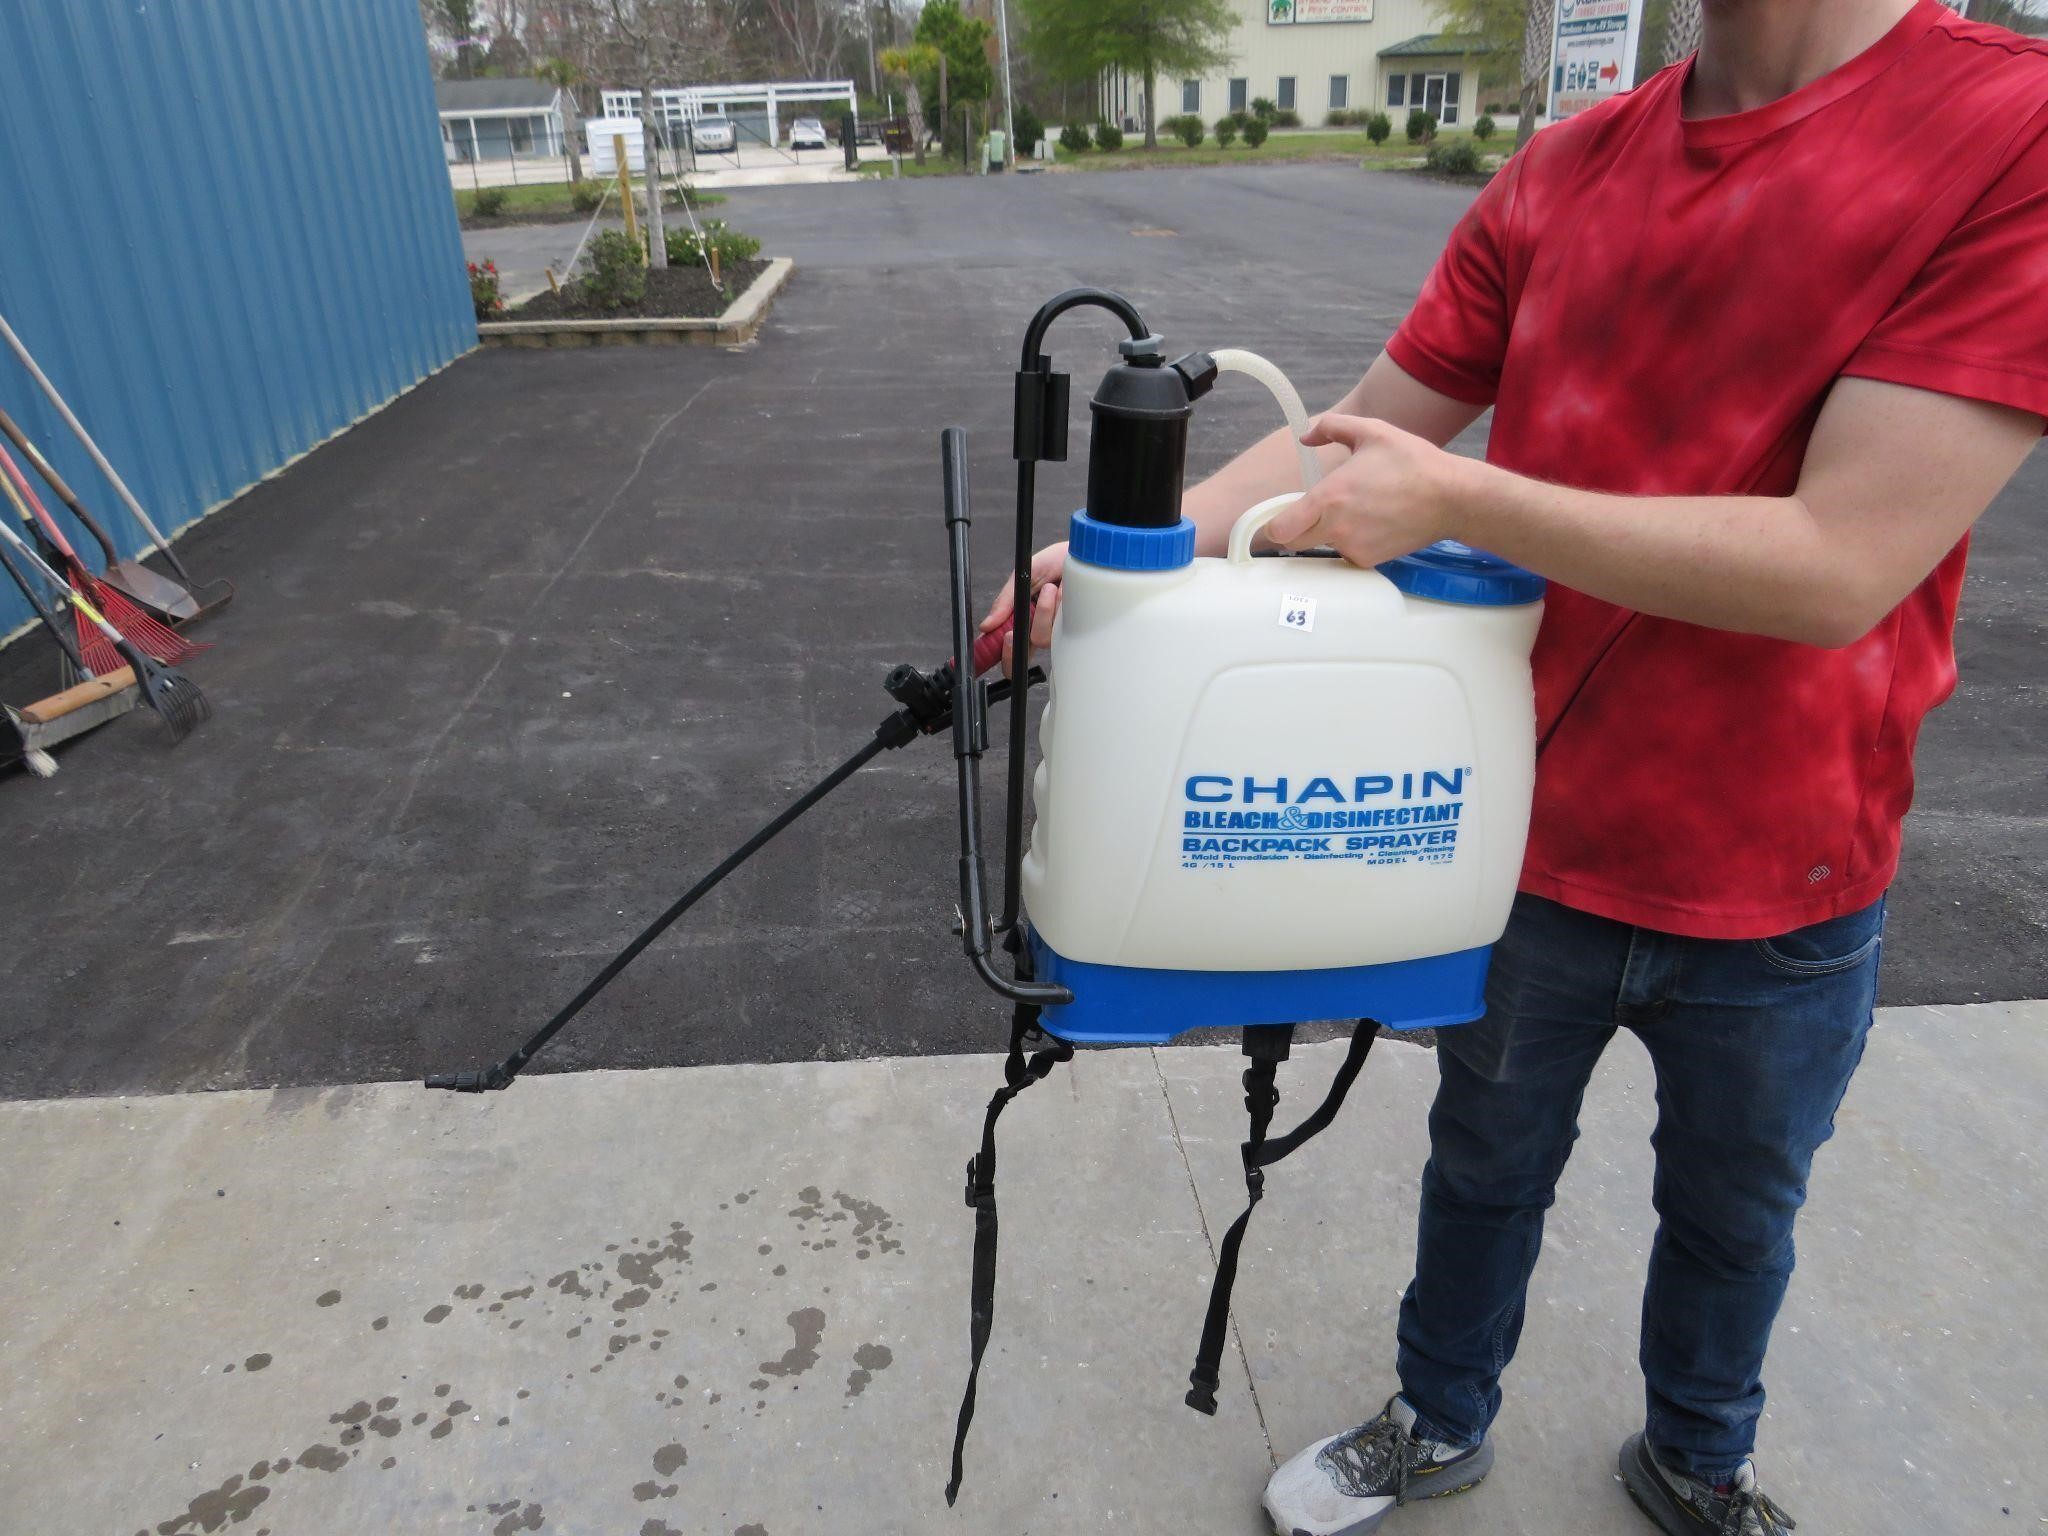 Chapin Bleach Backpack Sprayer, pick up only